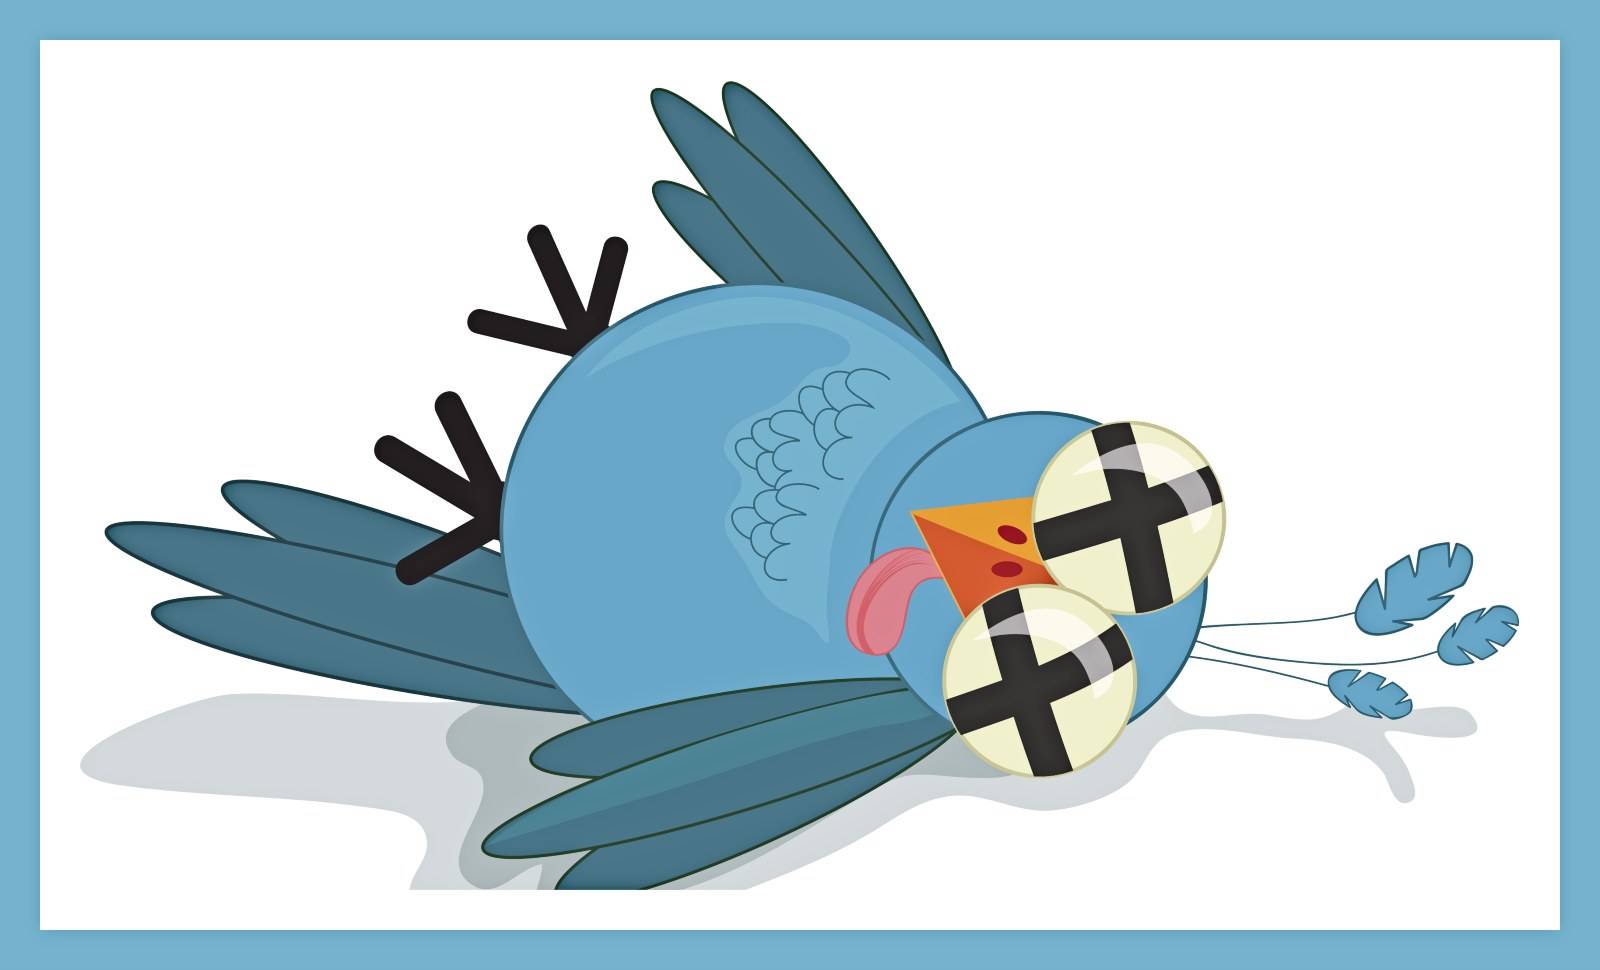 A cute, tongue-in-cheek, royalty free illustration of a dead or dazed Twitter bird.